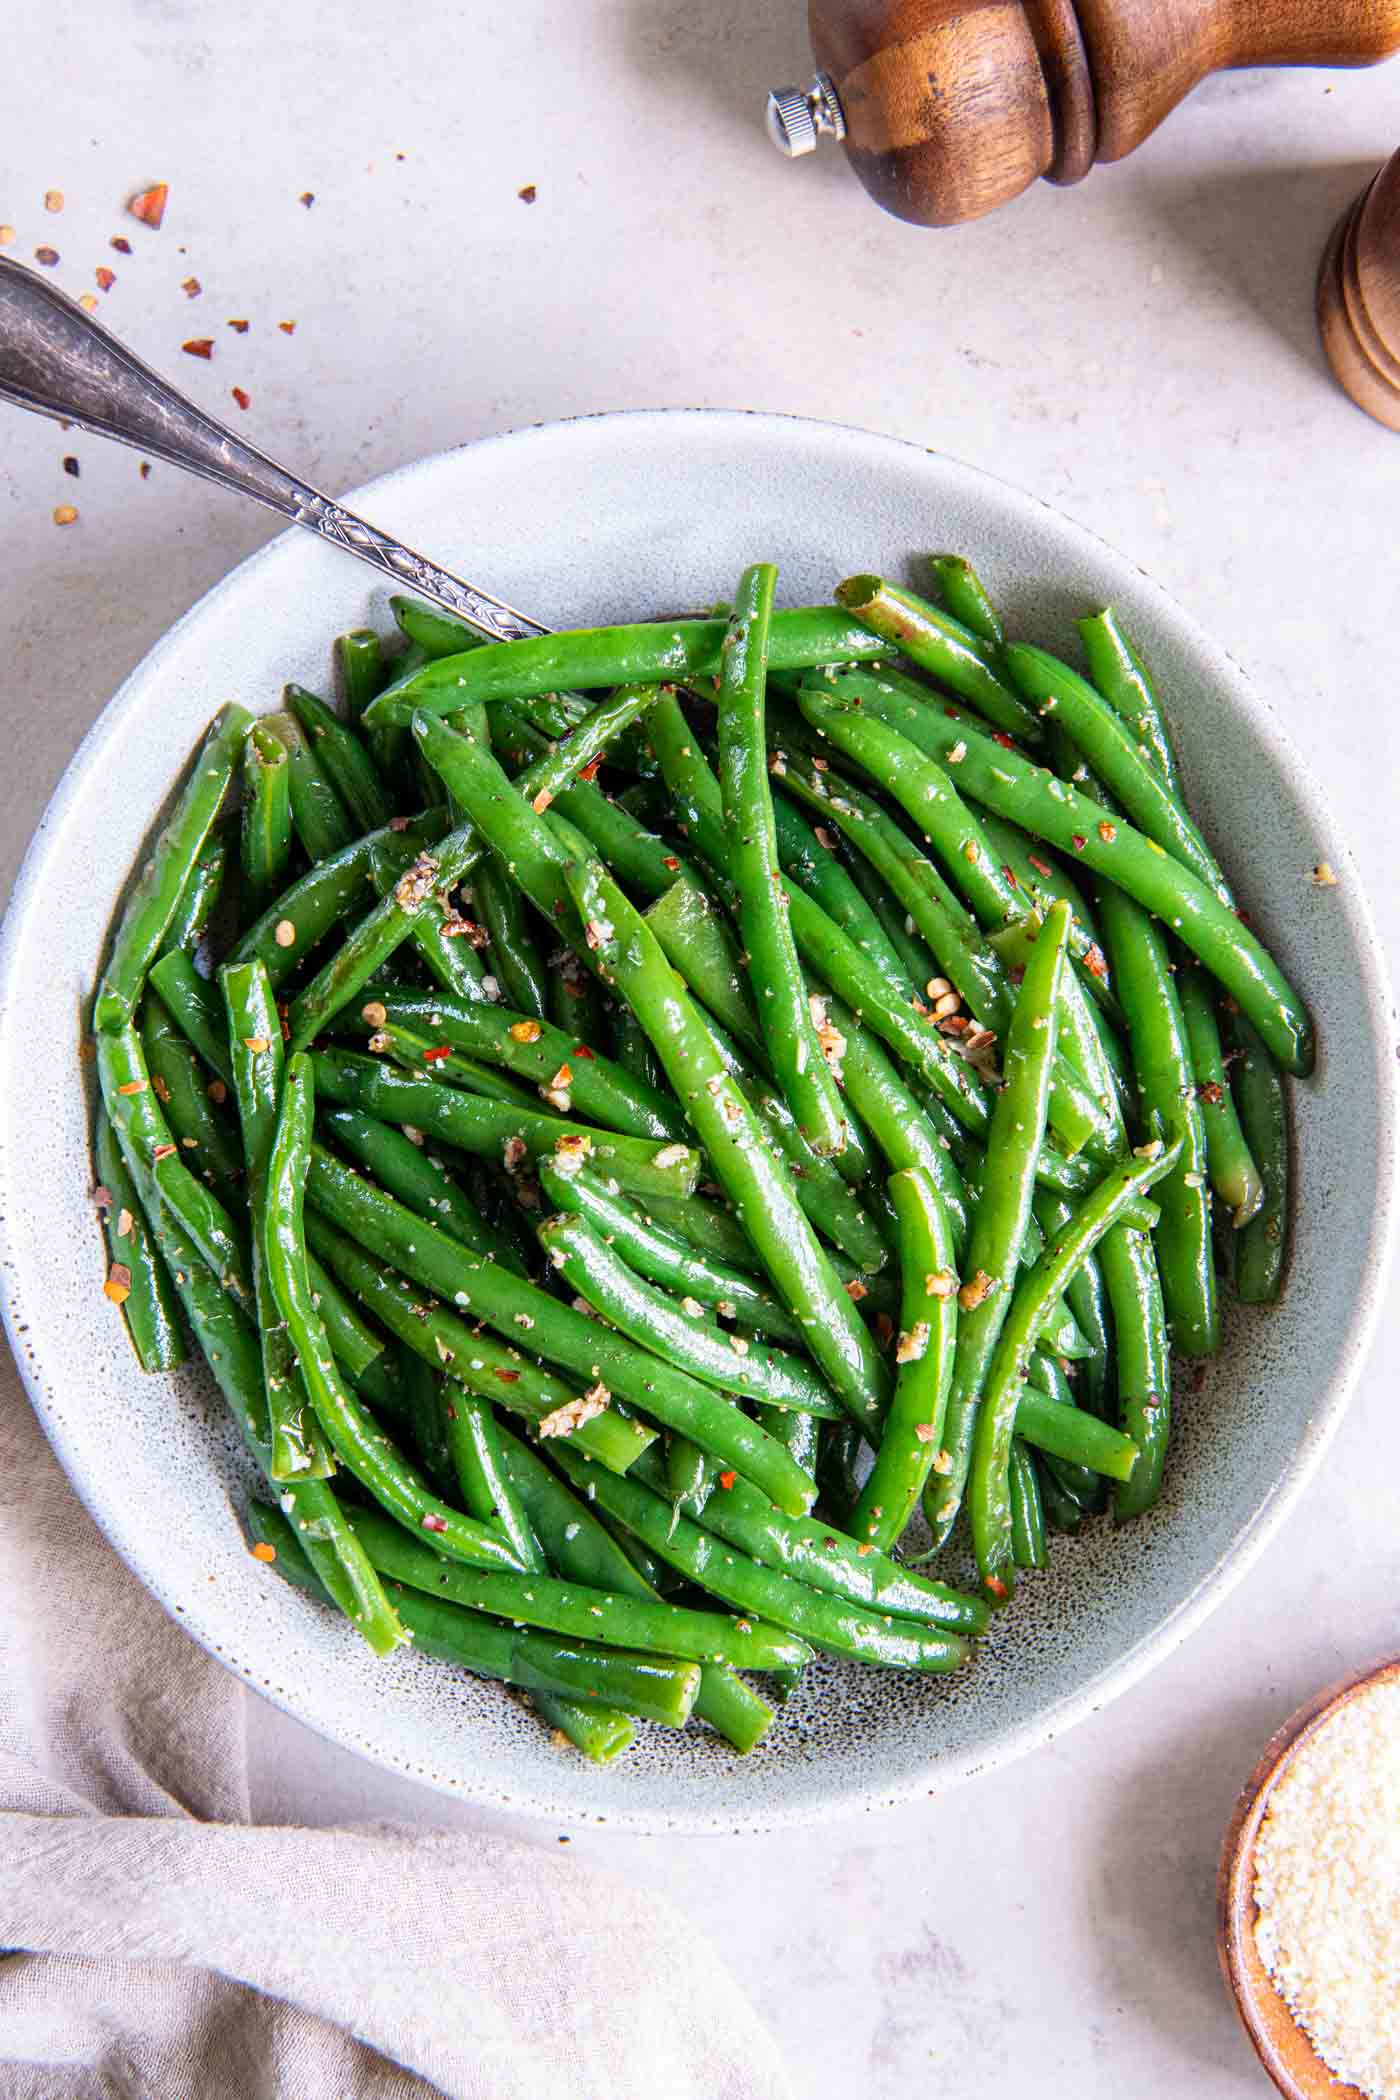 Sauteed green beans in a serving bowl with a spoon.